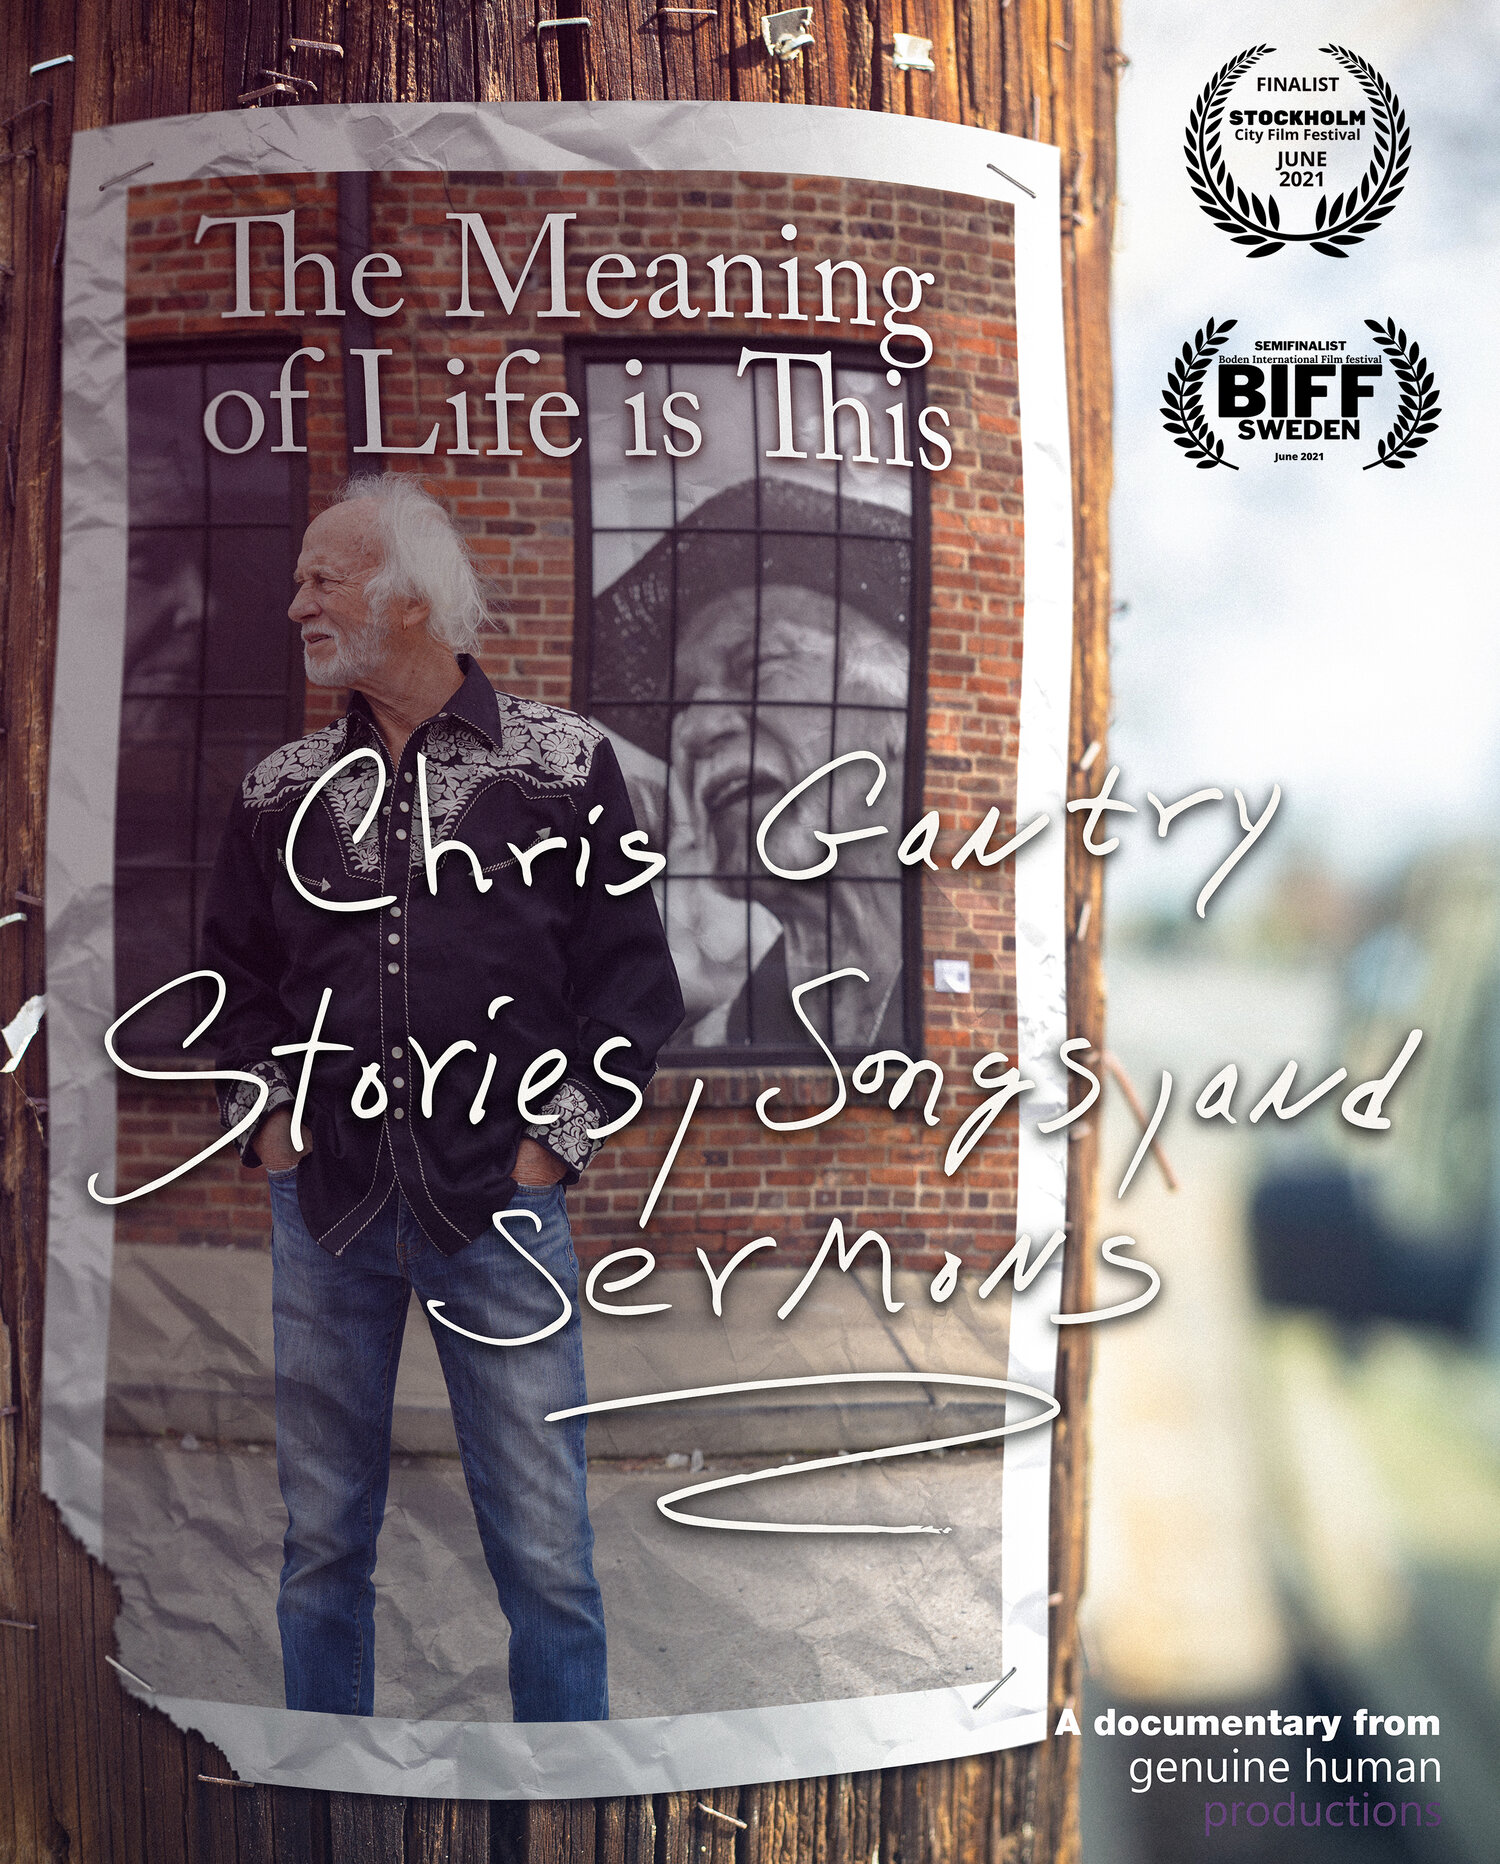 The Meaning of Life is This: Chris Gantry Stories, Songs &amp; Sermons